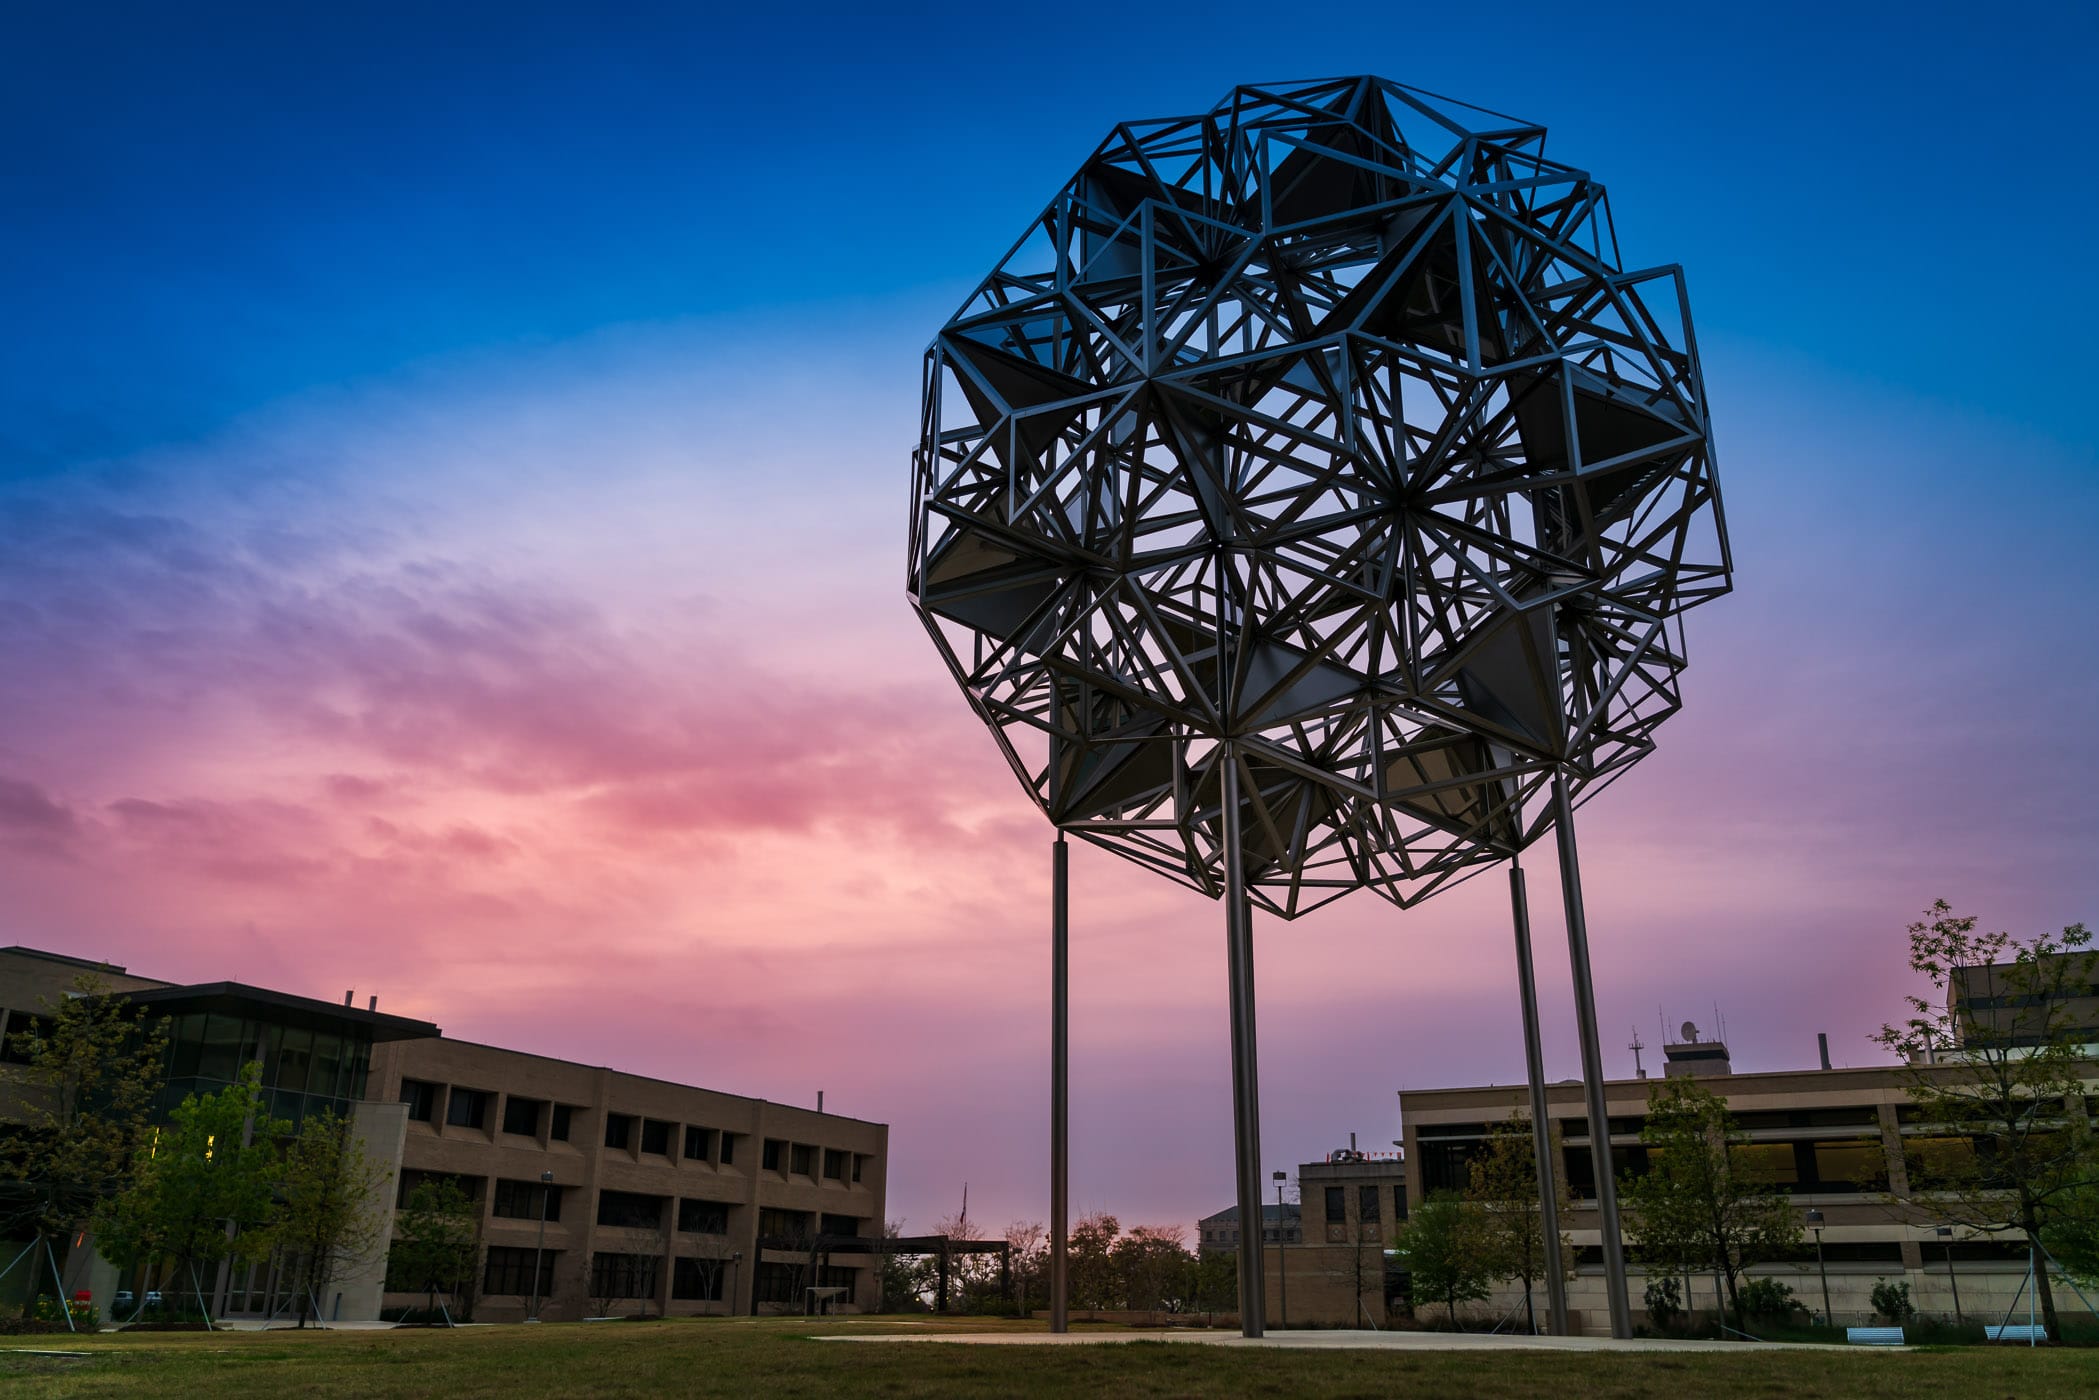 Sculpture Olafur Eliasson's "How to Build a Sphere Out of Cubes" on Texas A&M University's Engineering Quad.